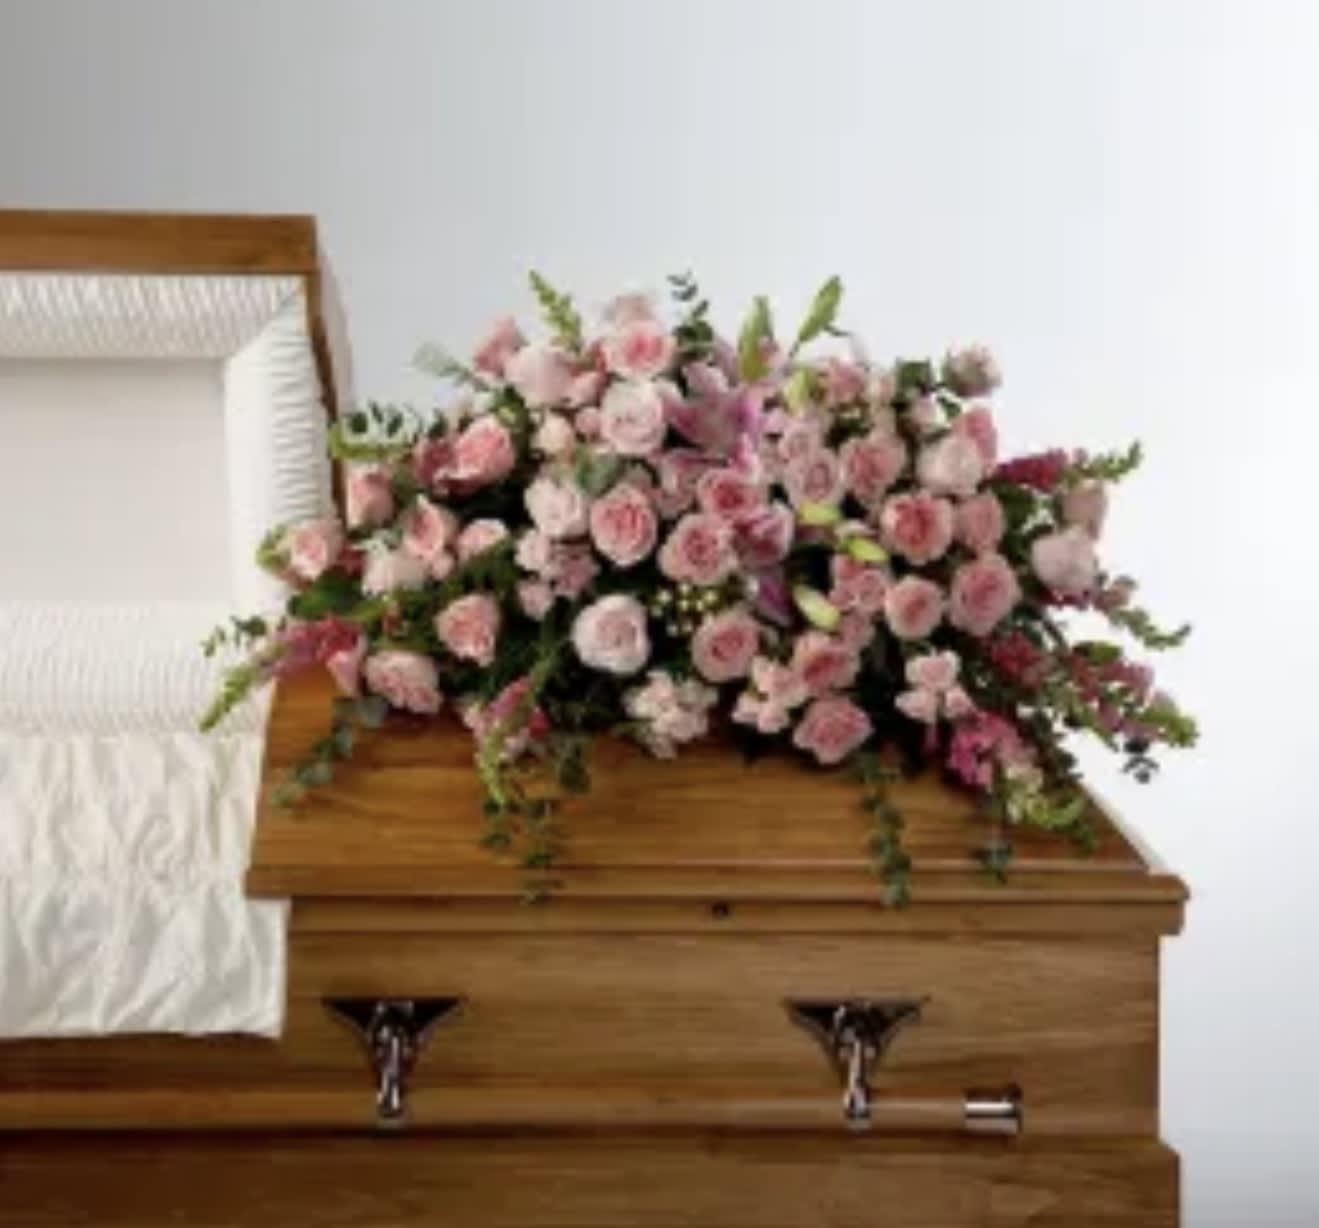 Tender Heart  - Roses, lilies, and more come together for a blushing pink half casket spray. Sized to fit both open and closed caskets. 